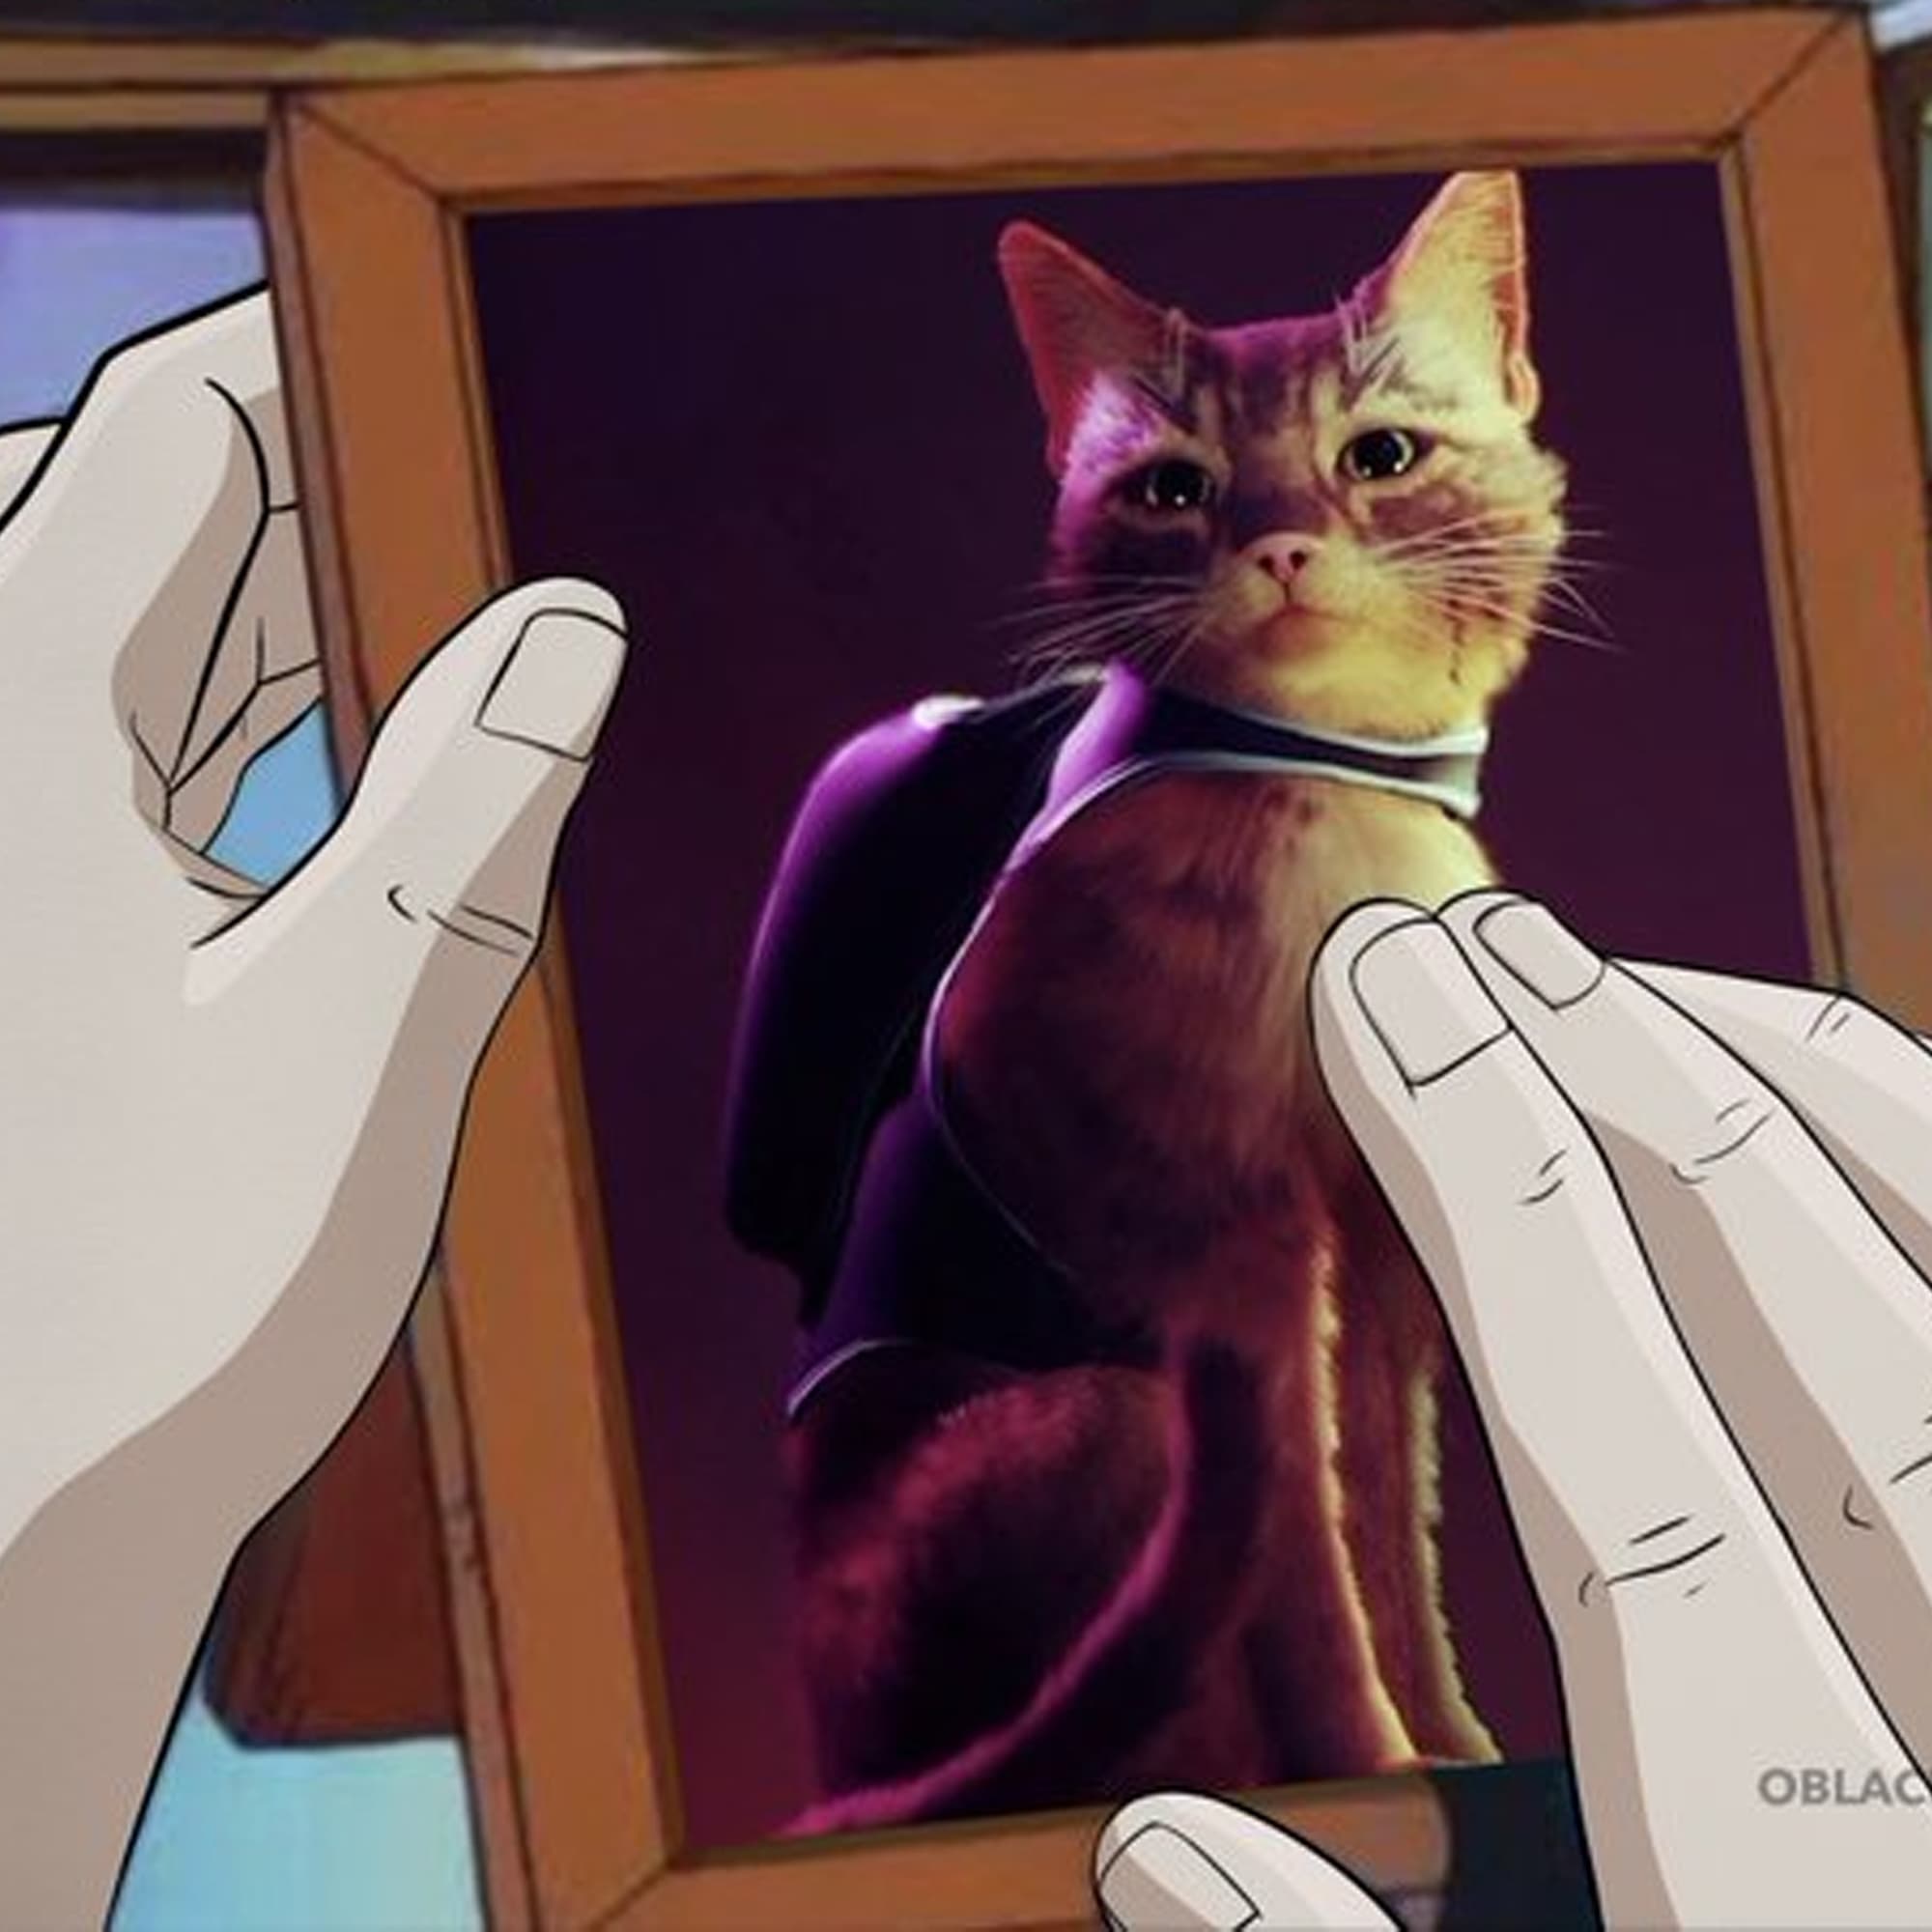 A framed photo of the cat from Stray, from a tweet by @BT_BlackThunder.